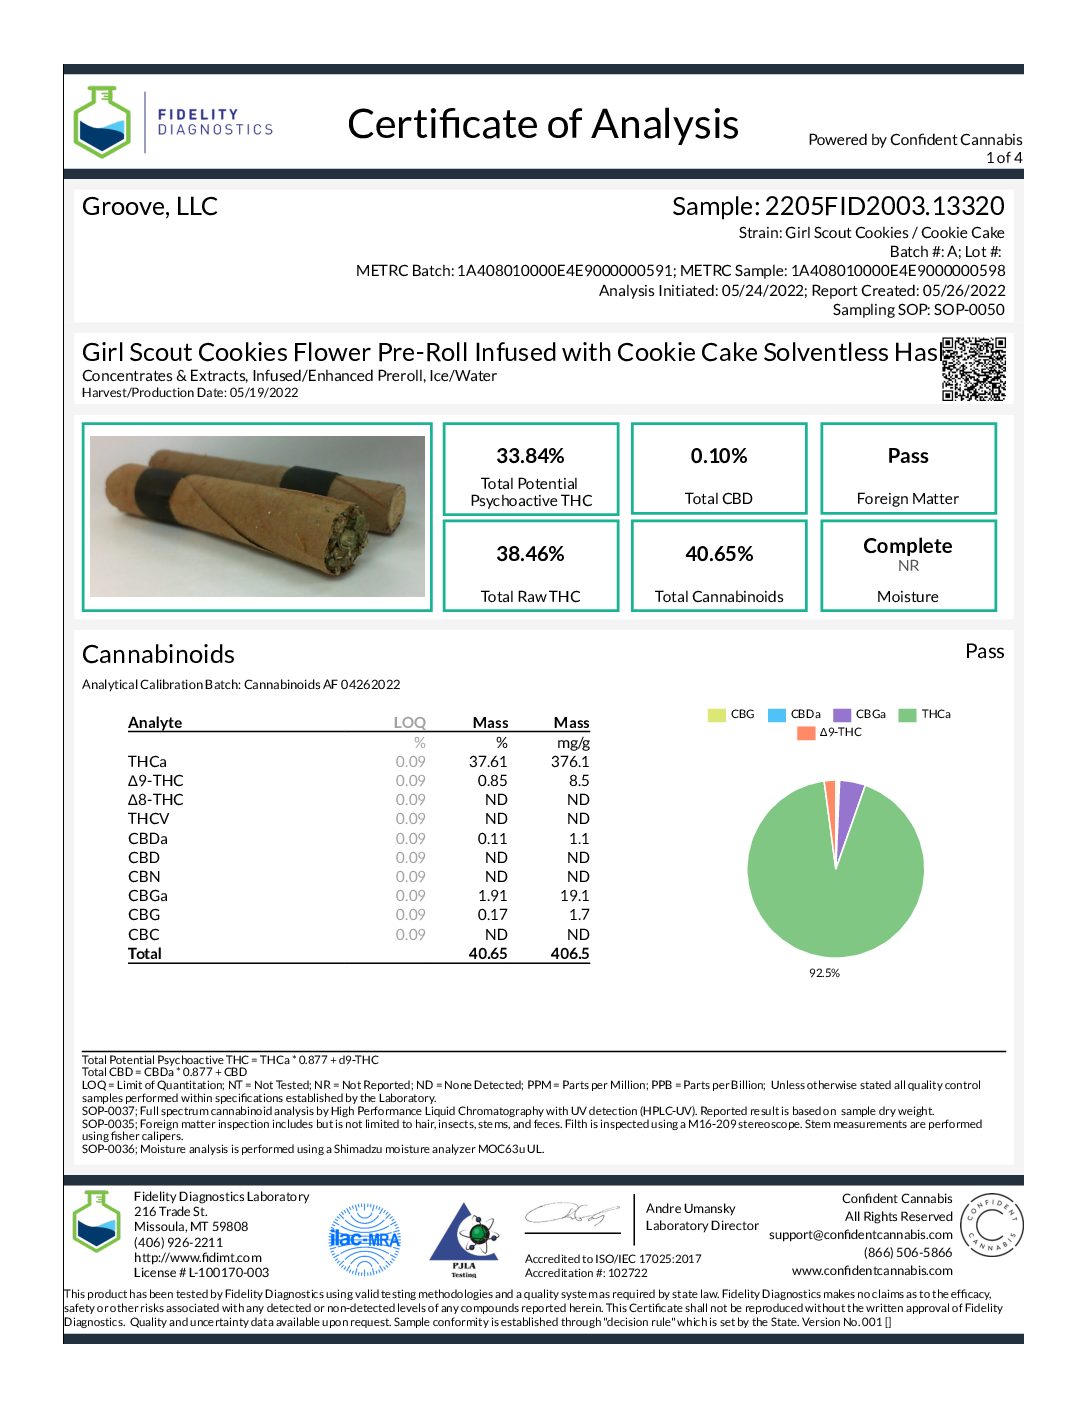 https://groovesolventless.com/wp-content/uploads/2022/05/Girl-Scout-Cookies-Flower-Pre-Roll-Infused-with-Cookie-Cake-SolventlessHash-HB11-pdf.jpg